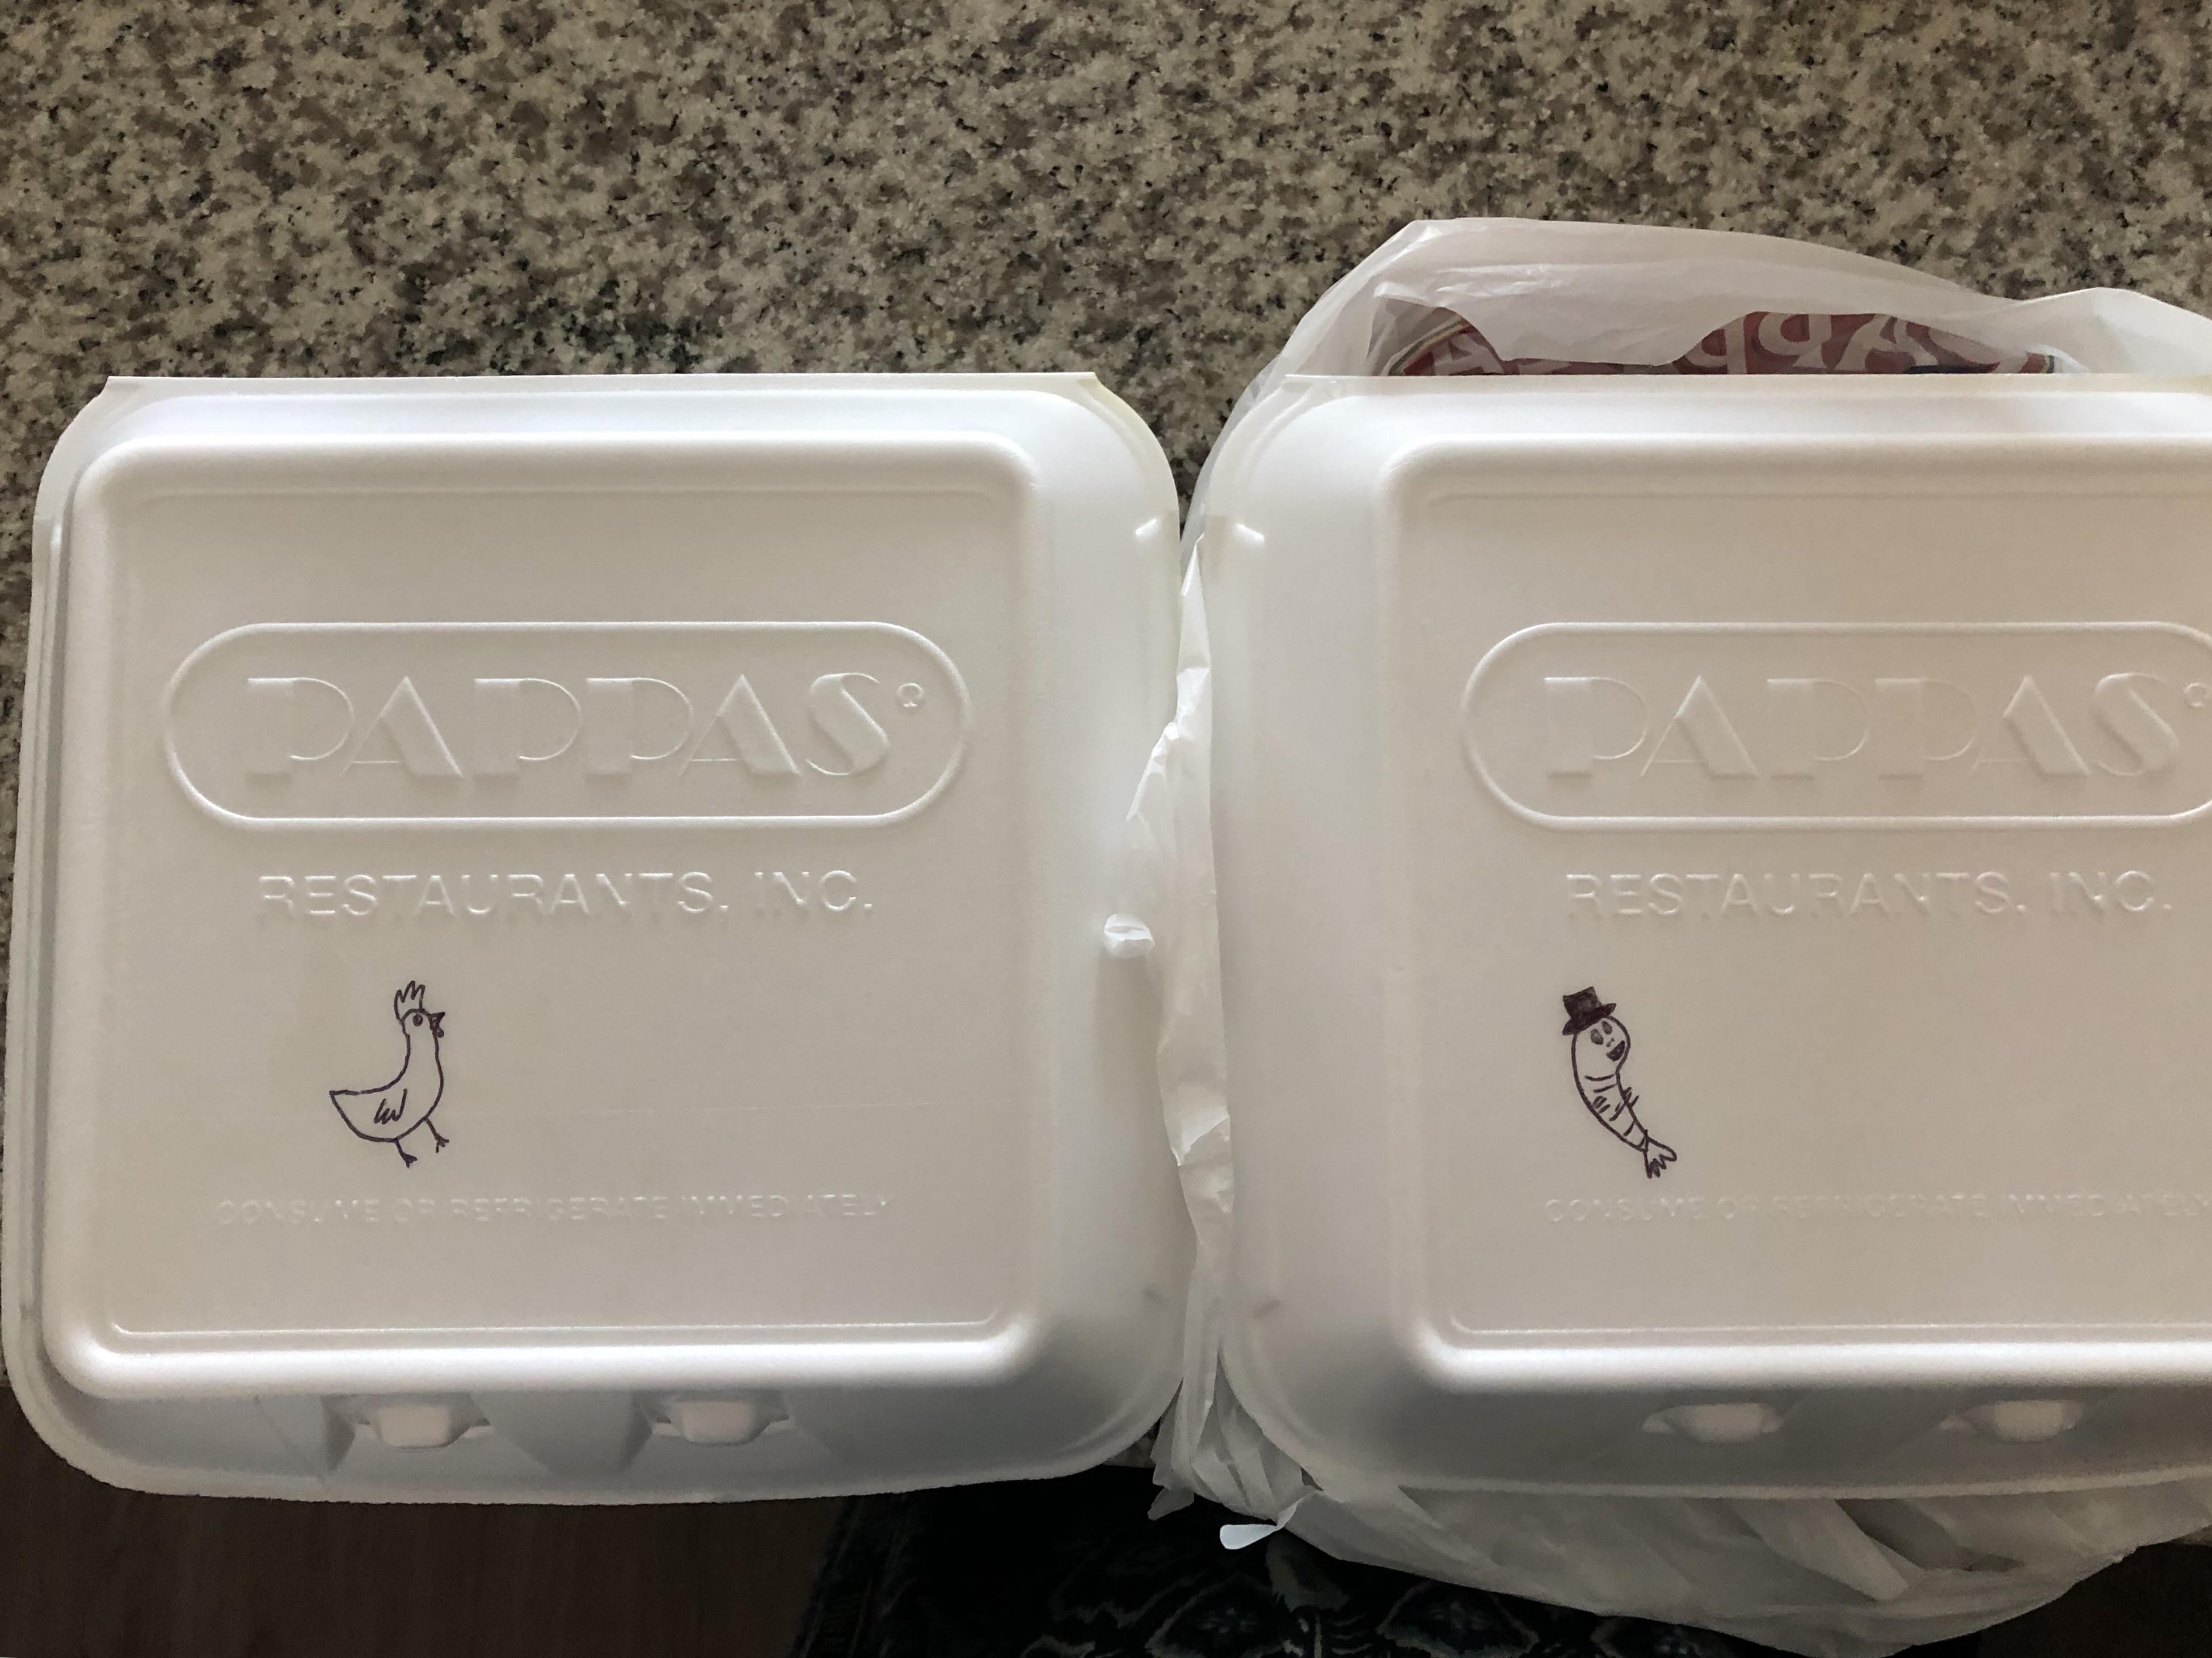 Our server at Pappadaux’s labeled our to-go boxes for us.